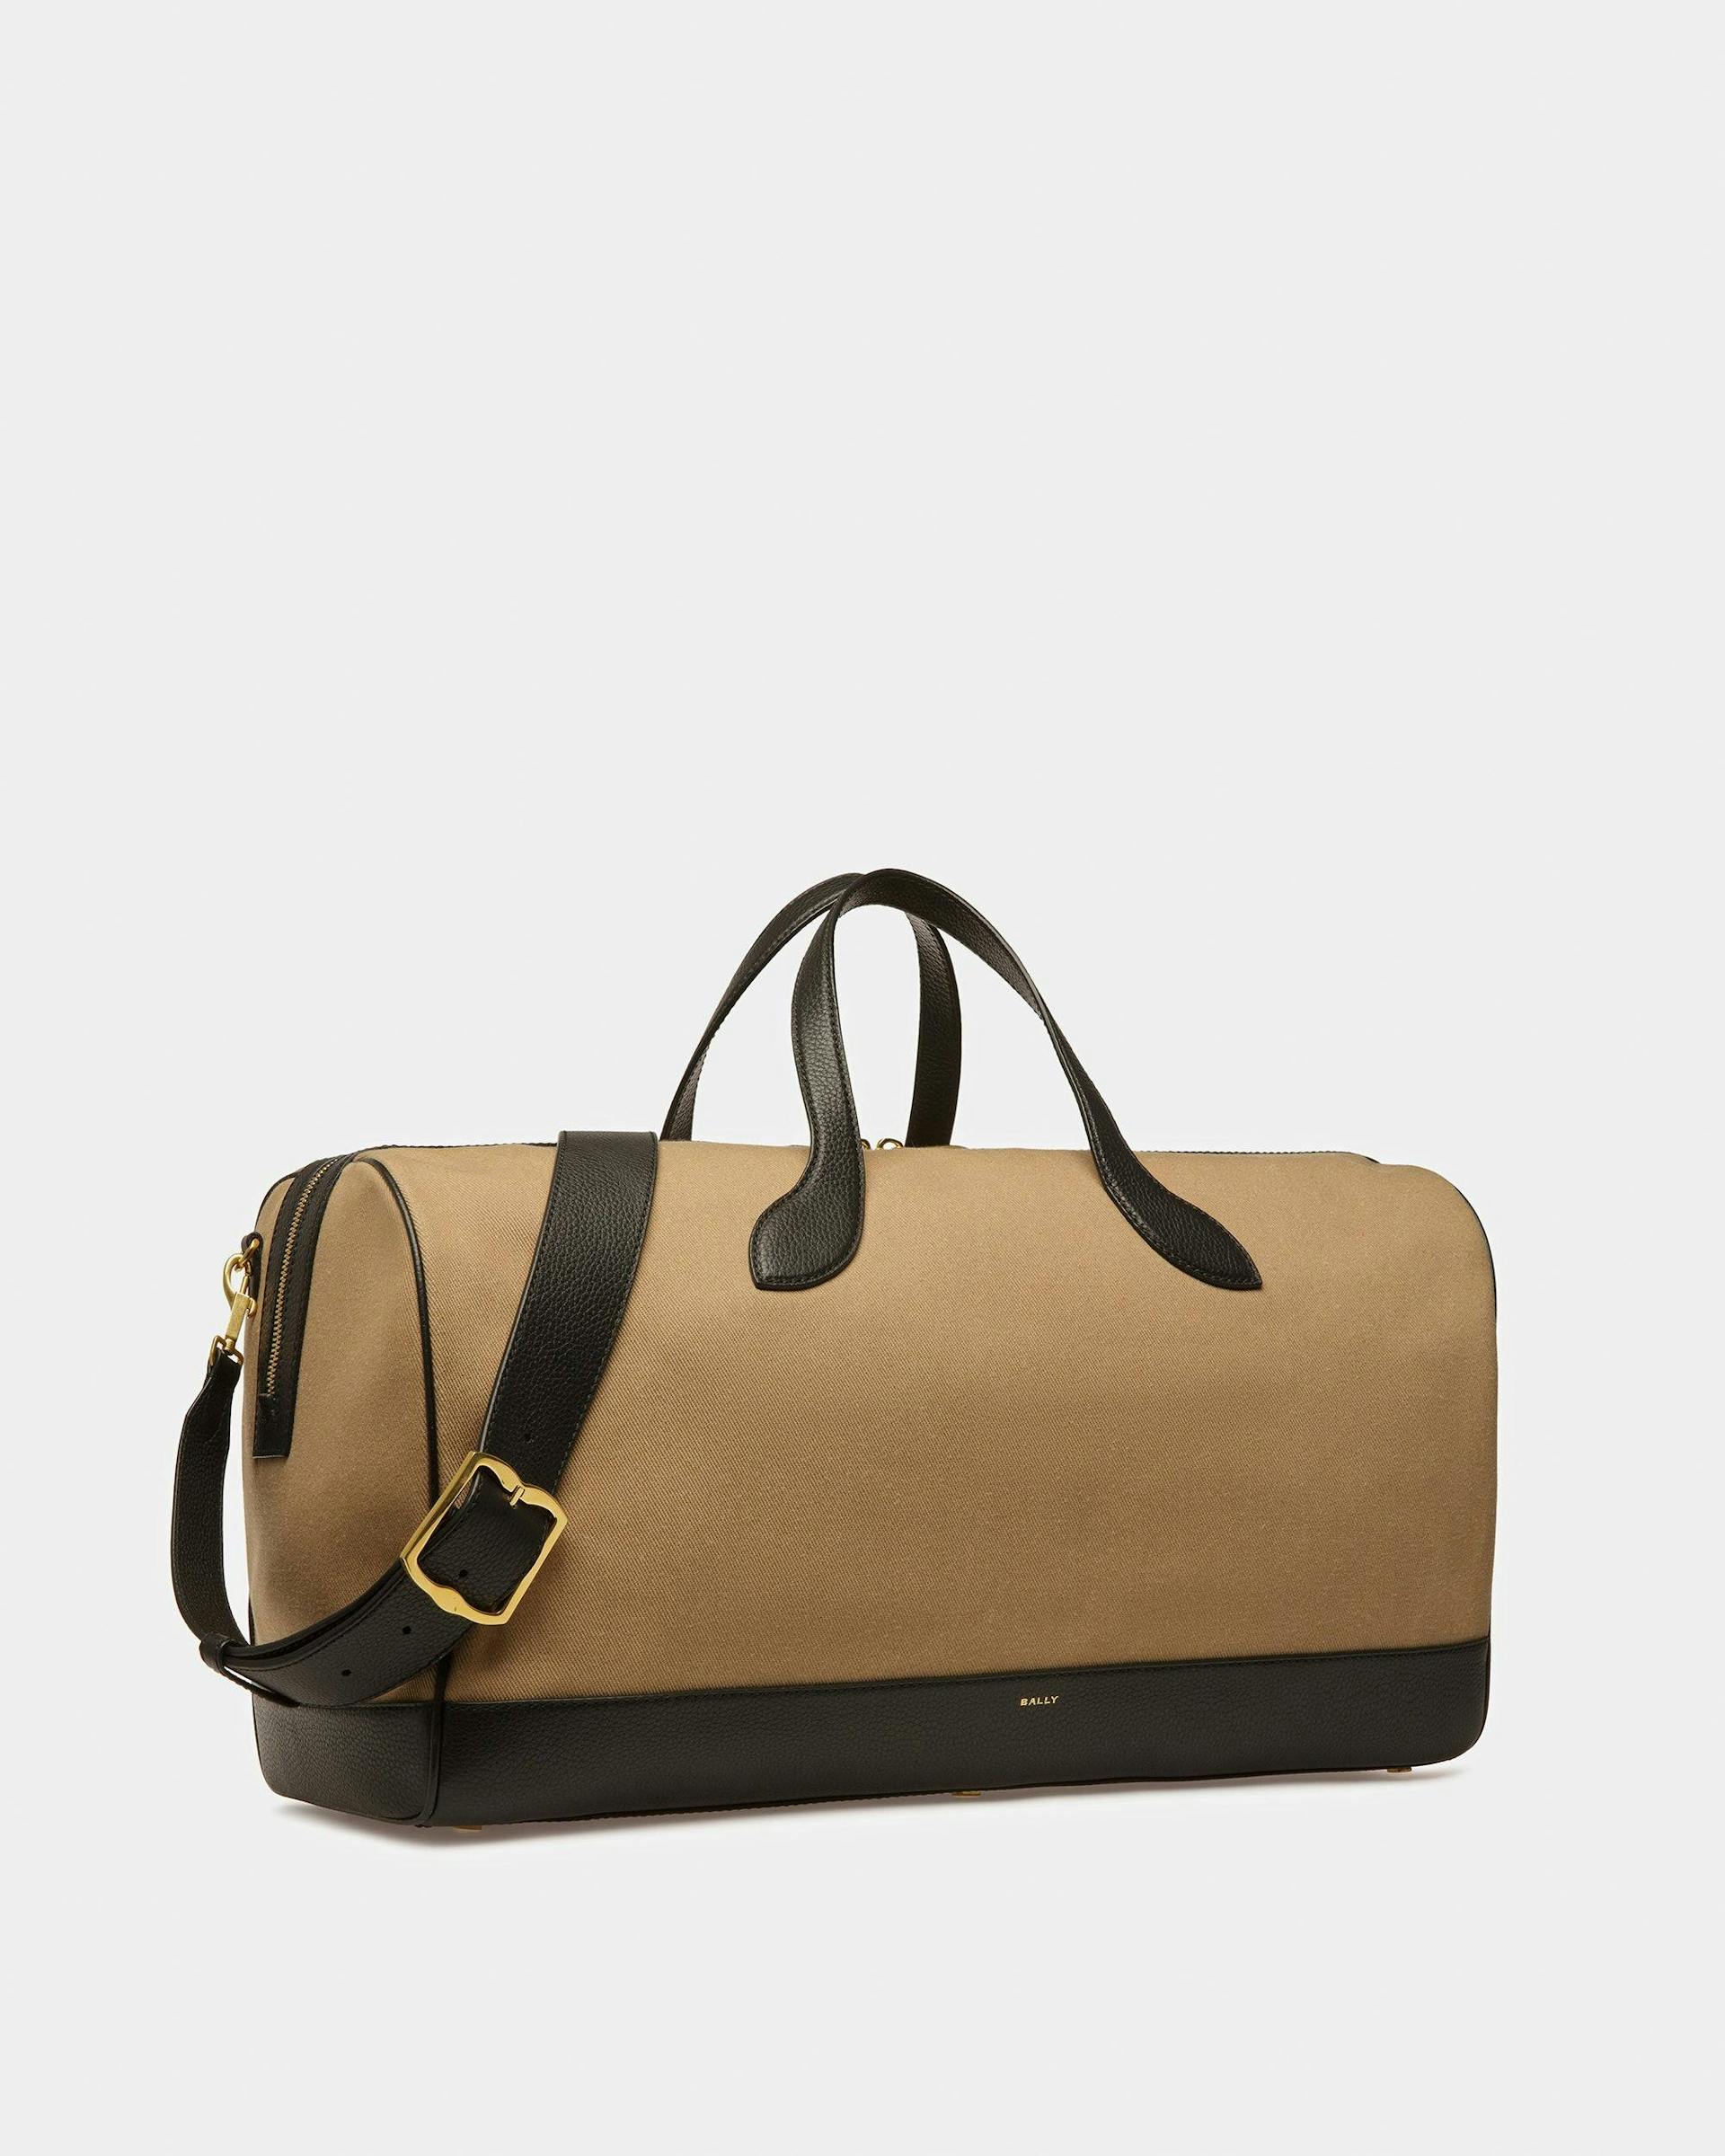 Bar Weekender In Sand And Black Fabric And Leather - Men's - Bally - 04